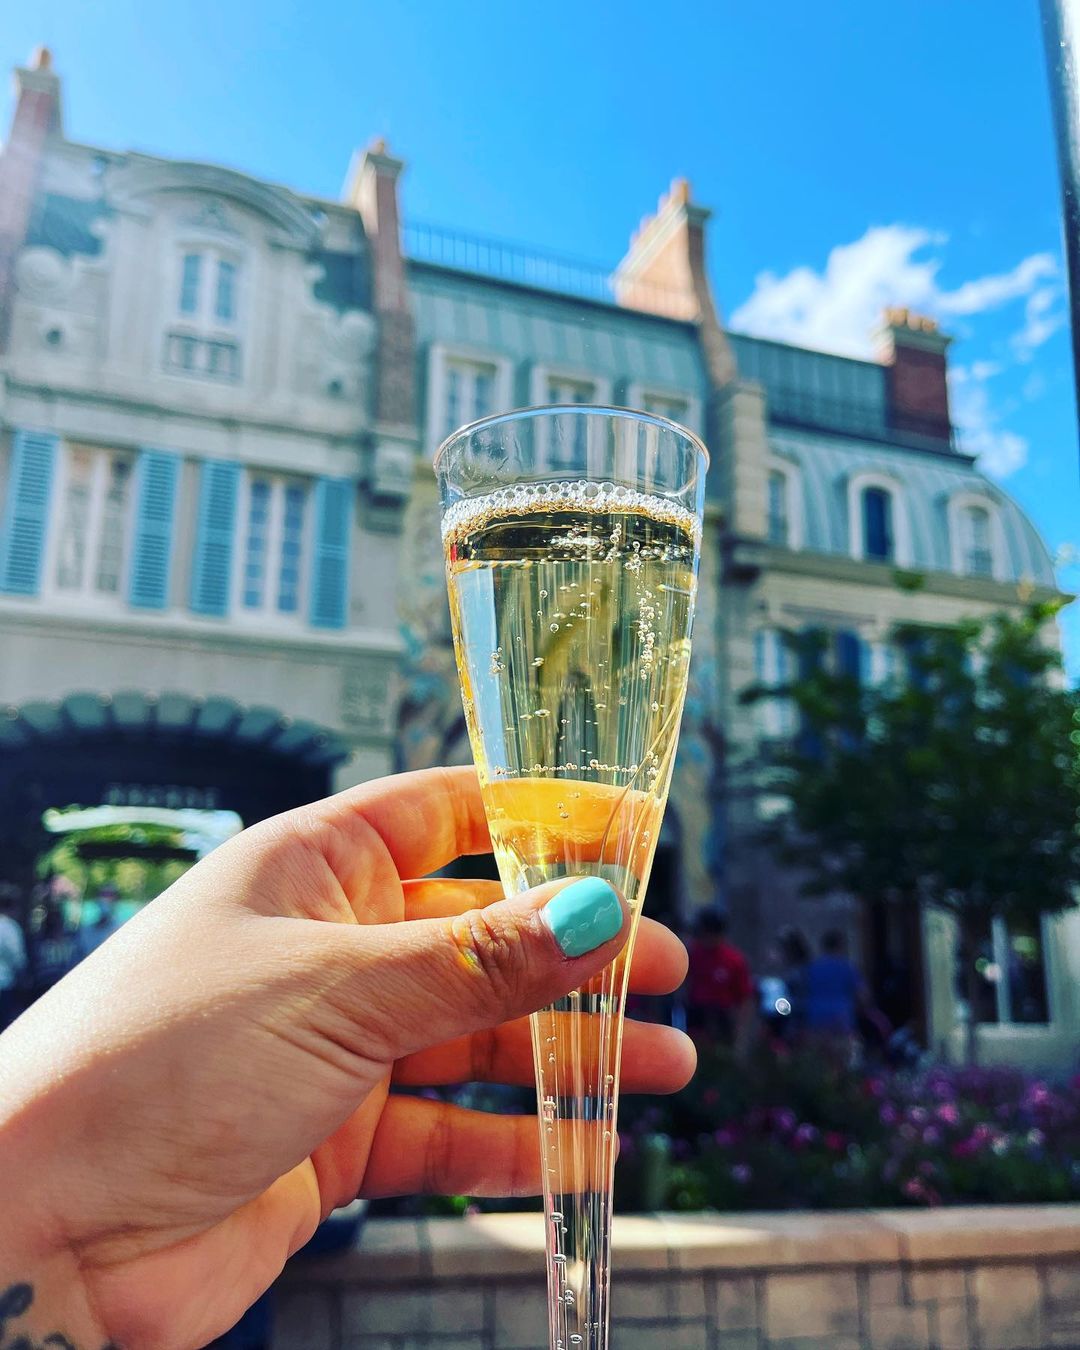 Drinking Around the World at Epcot - Sparkling Wine at the France Pavilion